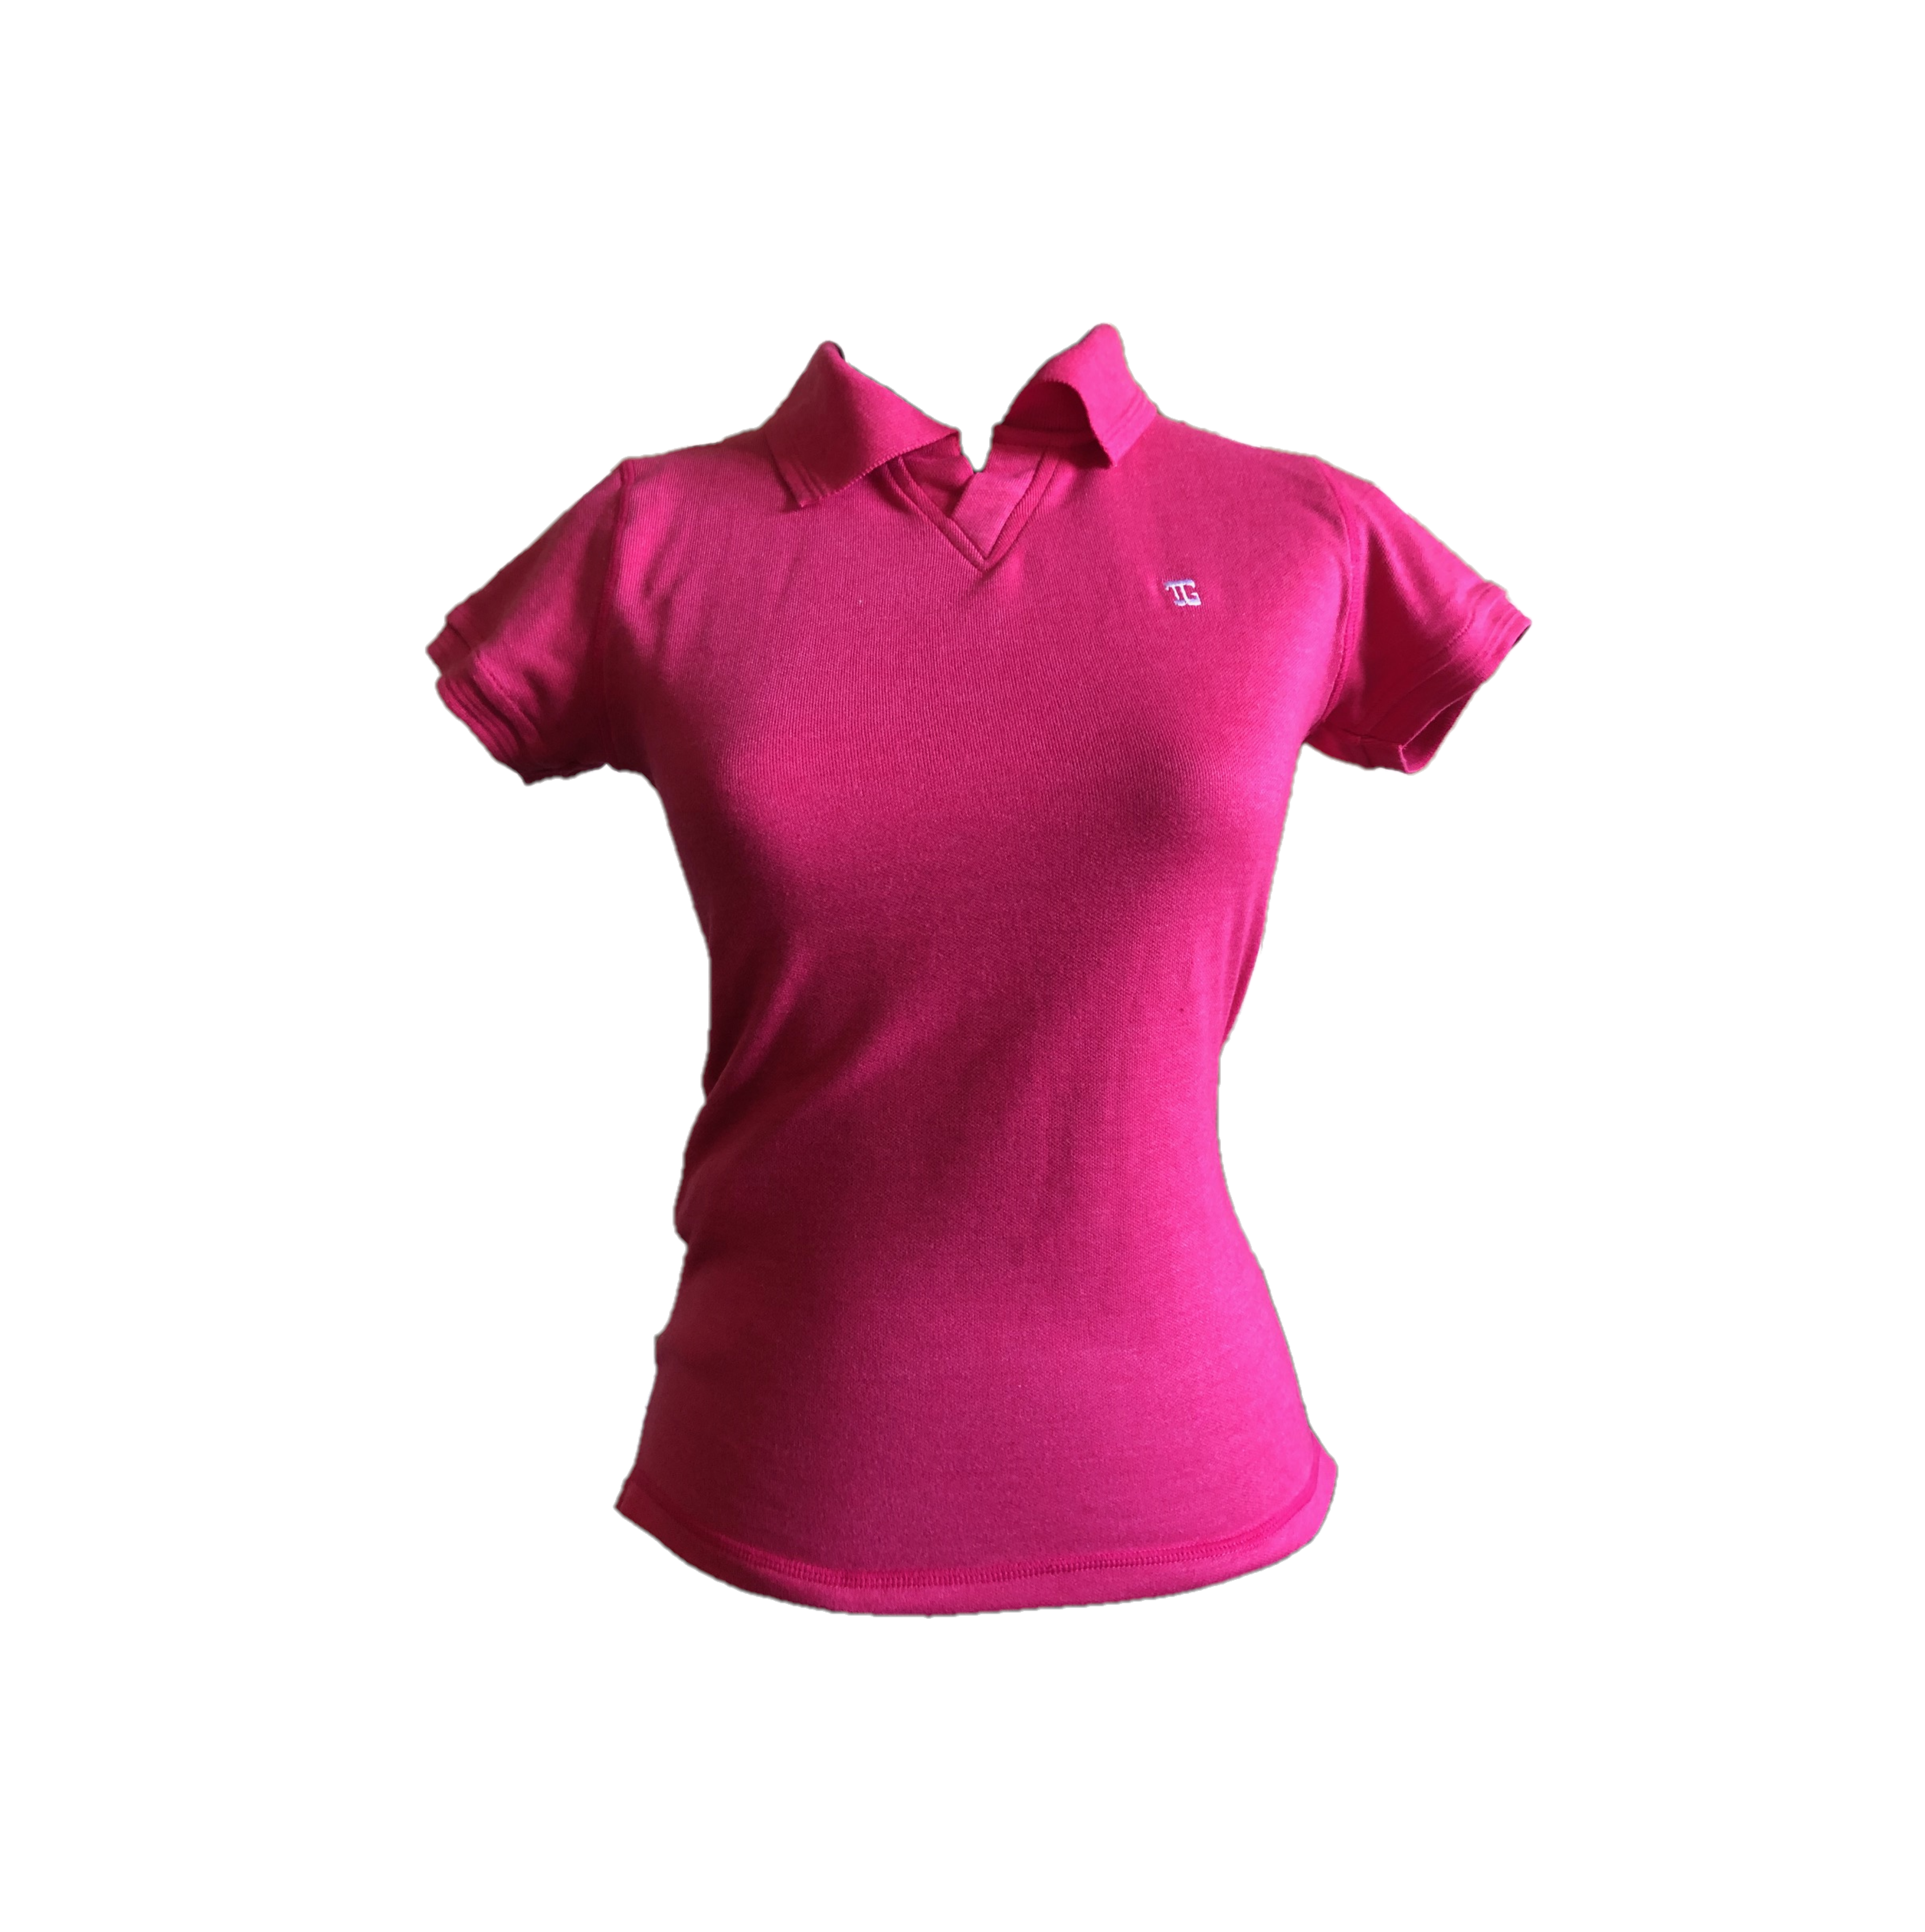 LT-107 || Ladies Top Raspberry Pink Textured Cloth Short Sleeves V Neck with Collar Rear V  Overlocked Stitched Saddle